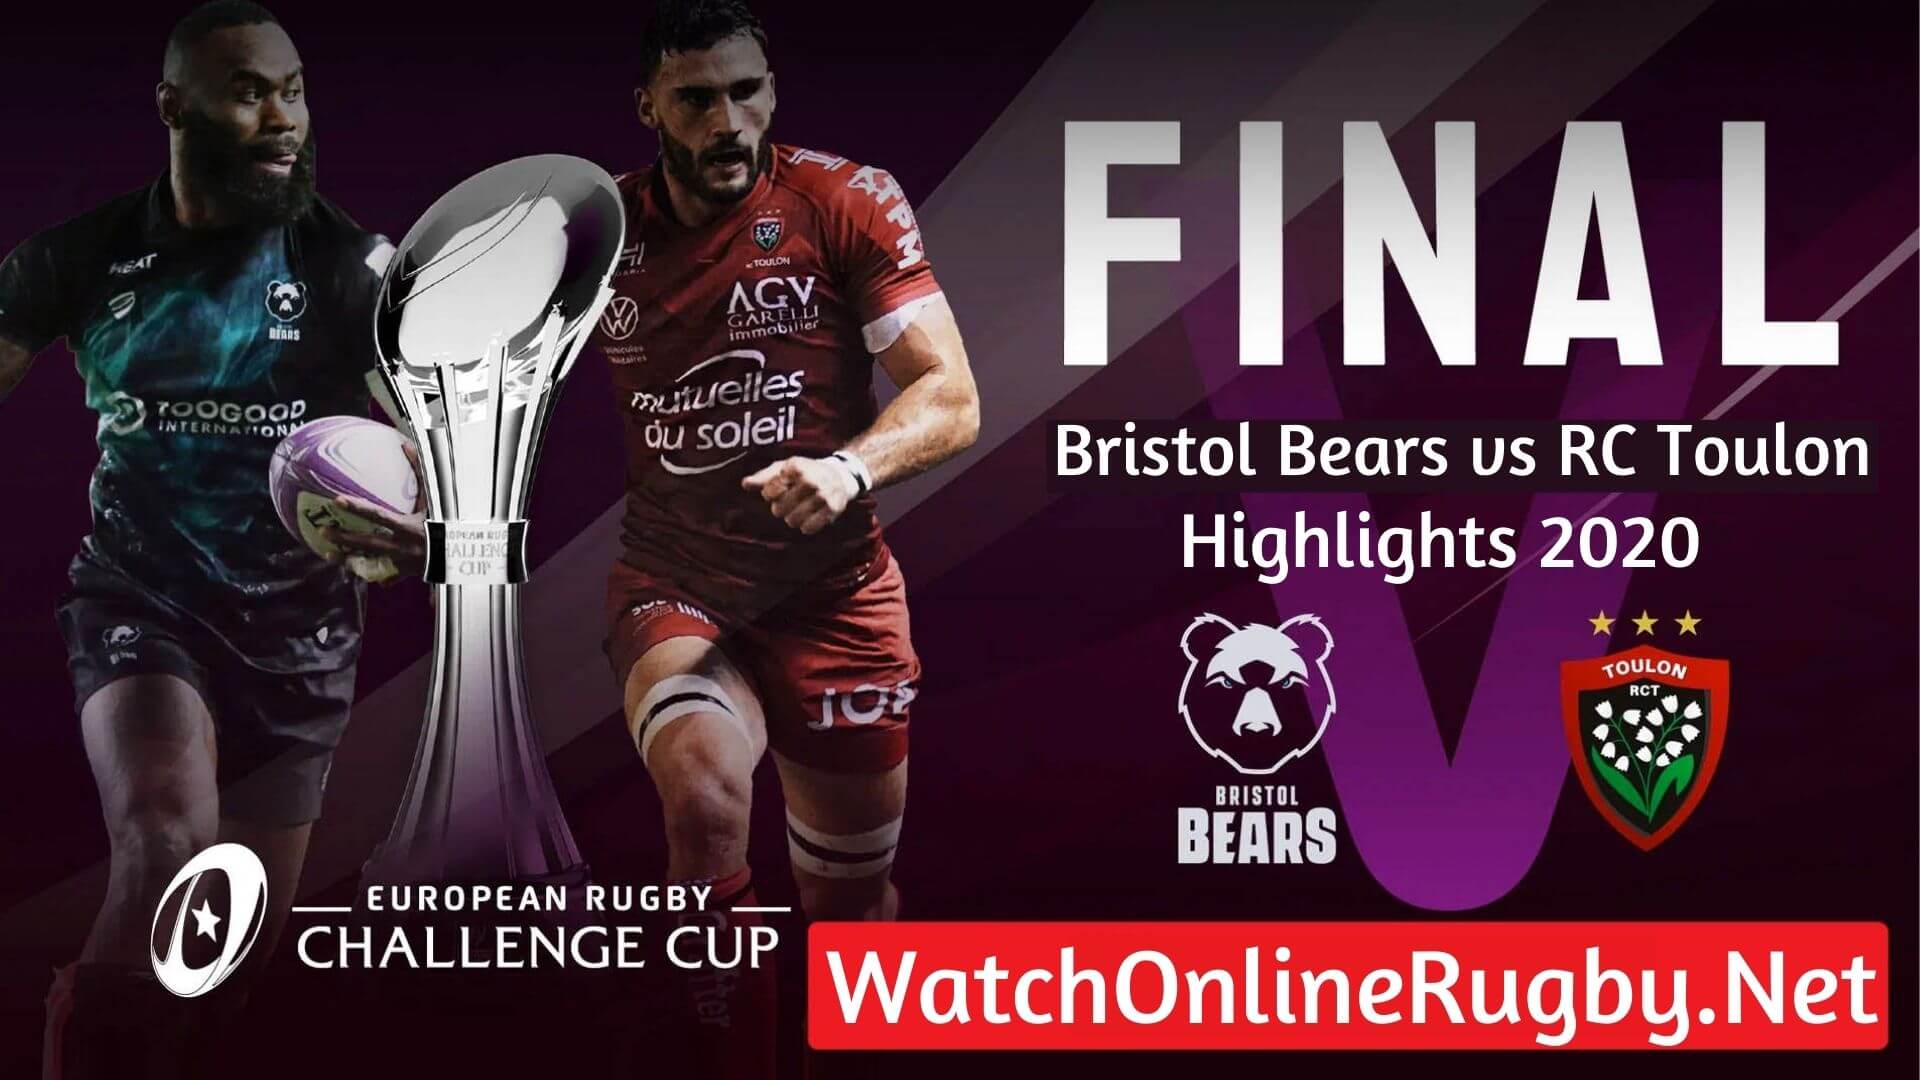 Bristol Bears vs RC Toulon Highlights 2020 European Rugby Challange Cup 